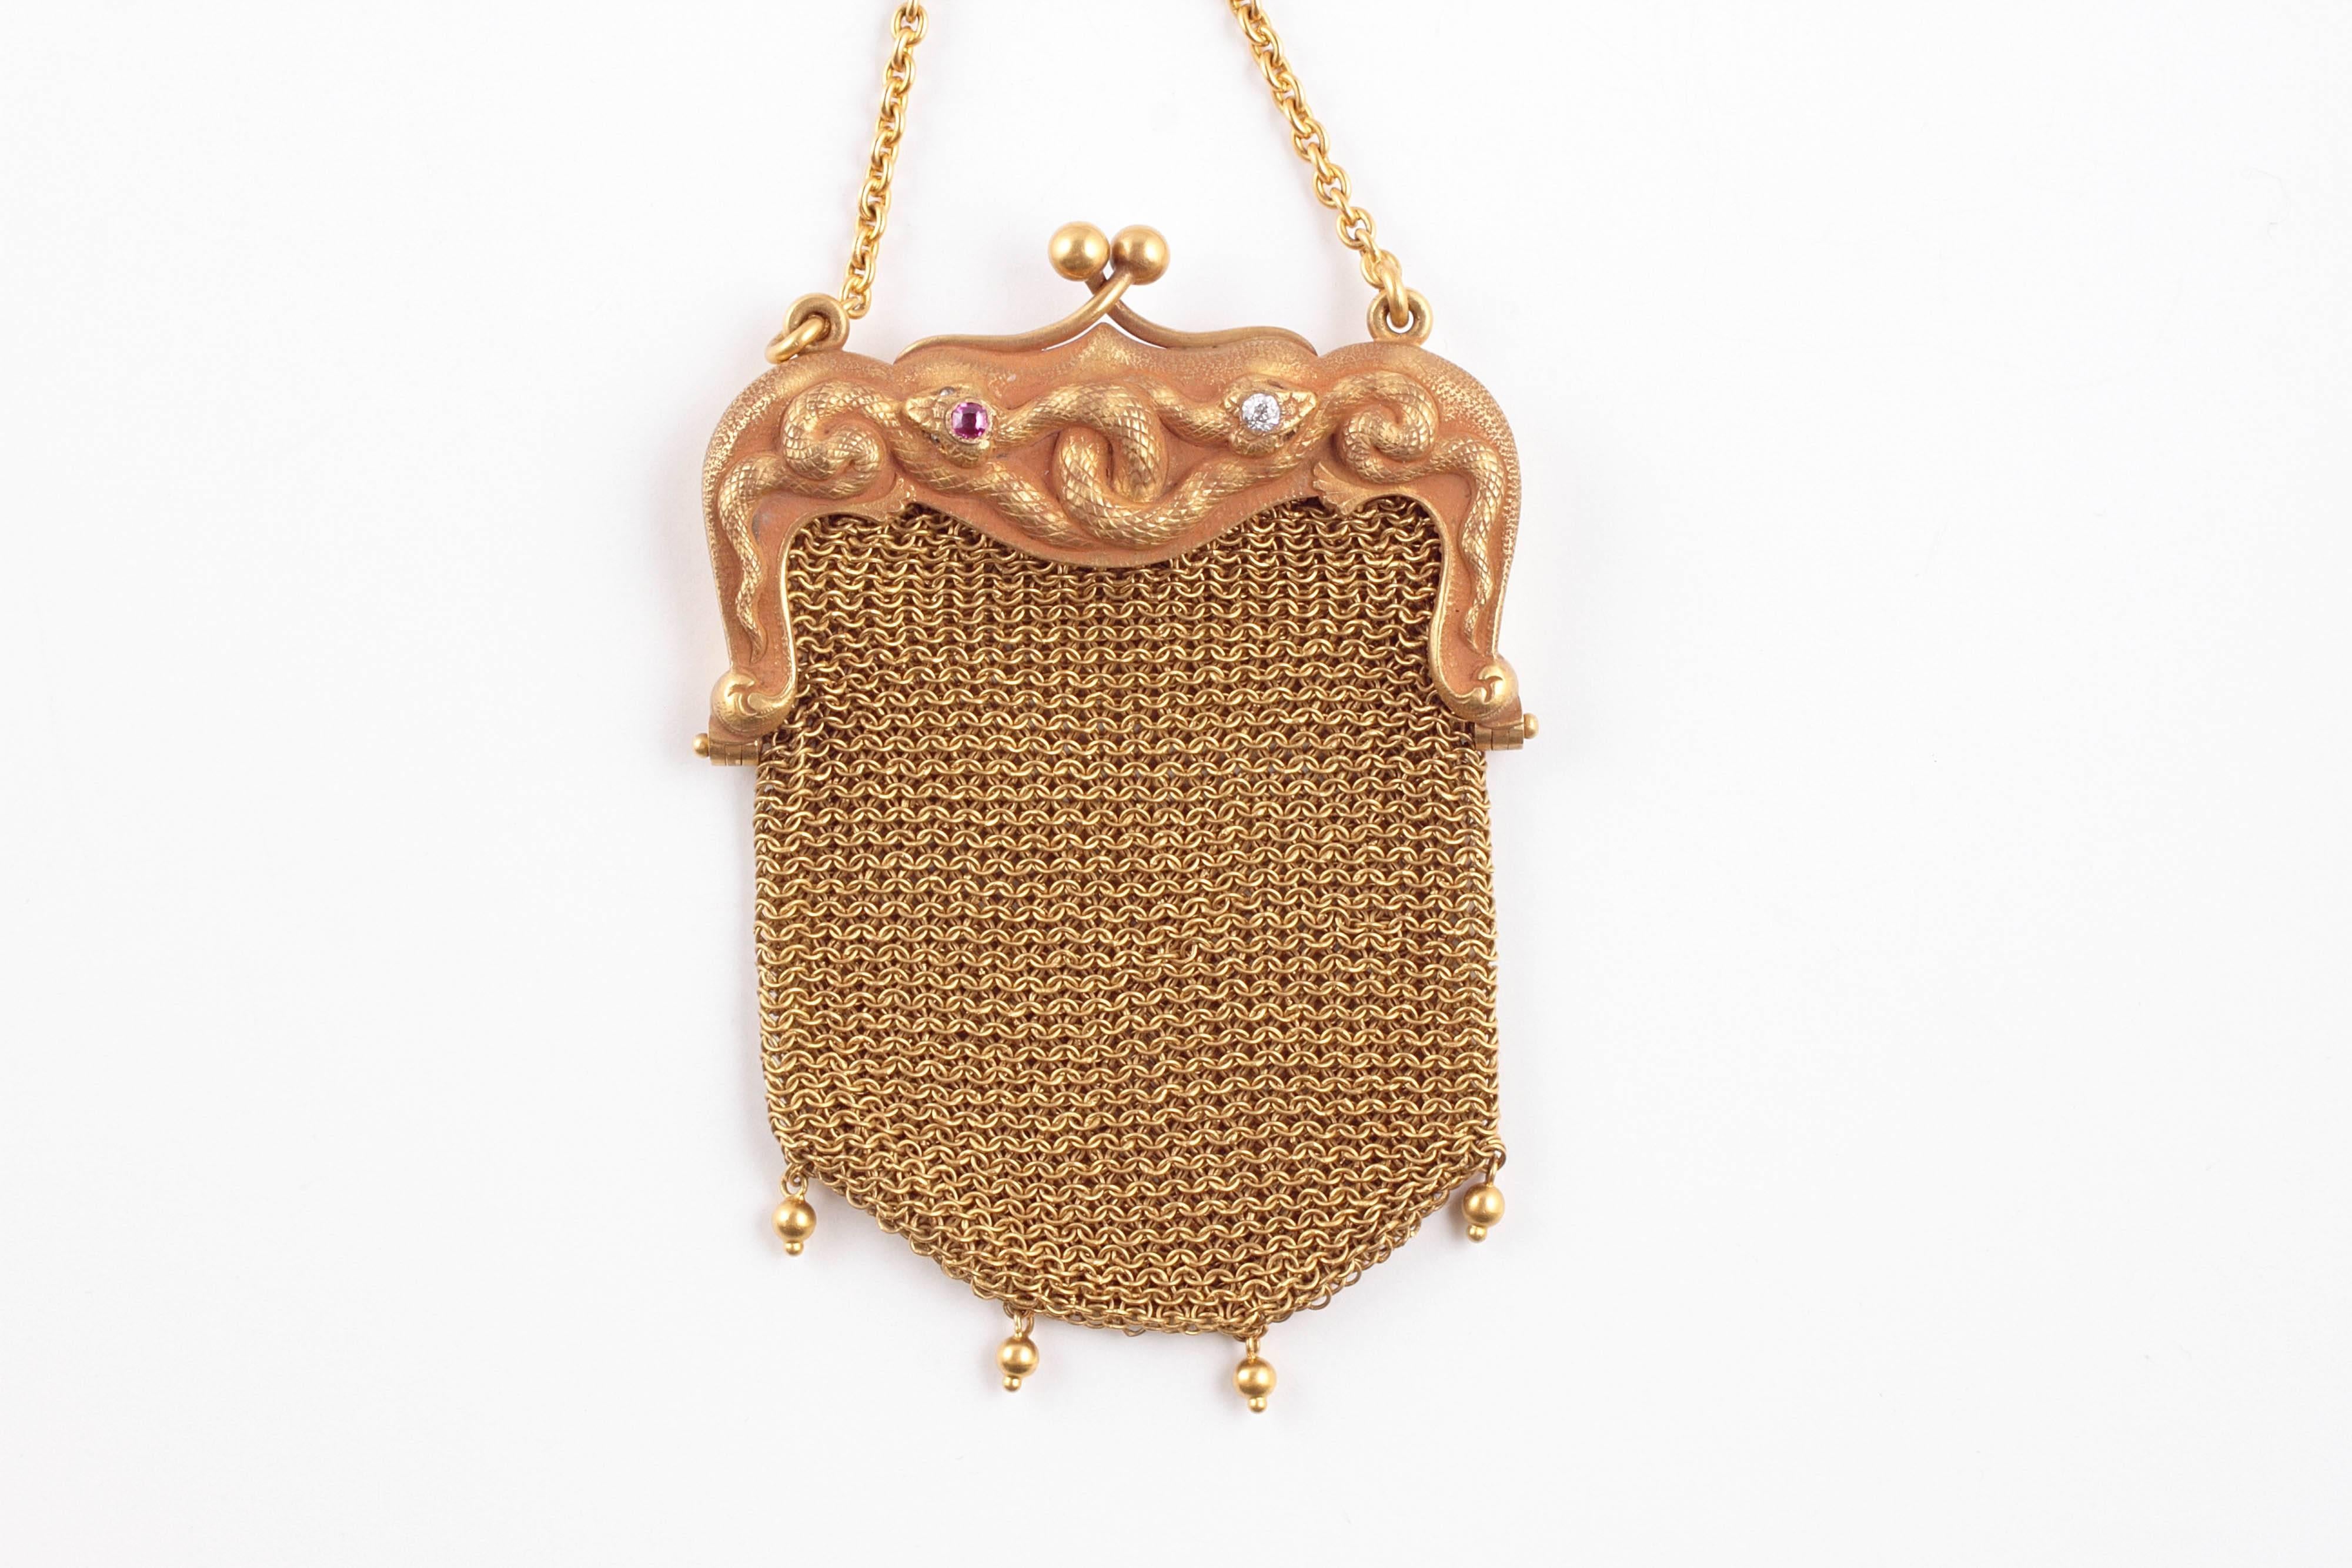 Interesting ring purse from Sloan and Co. with diamond and ruby accented snakes in 14 Karat gold mesh.  The ring portion is size 8 1/4.